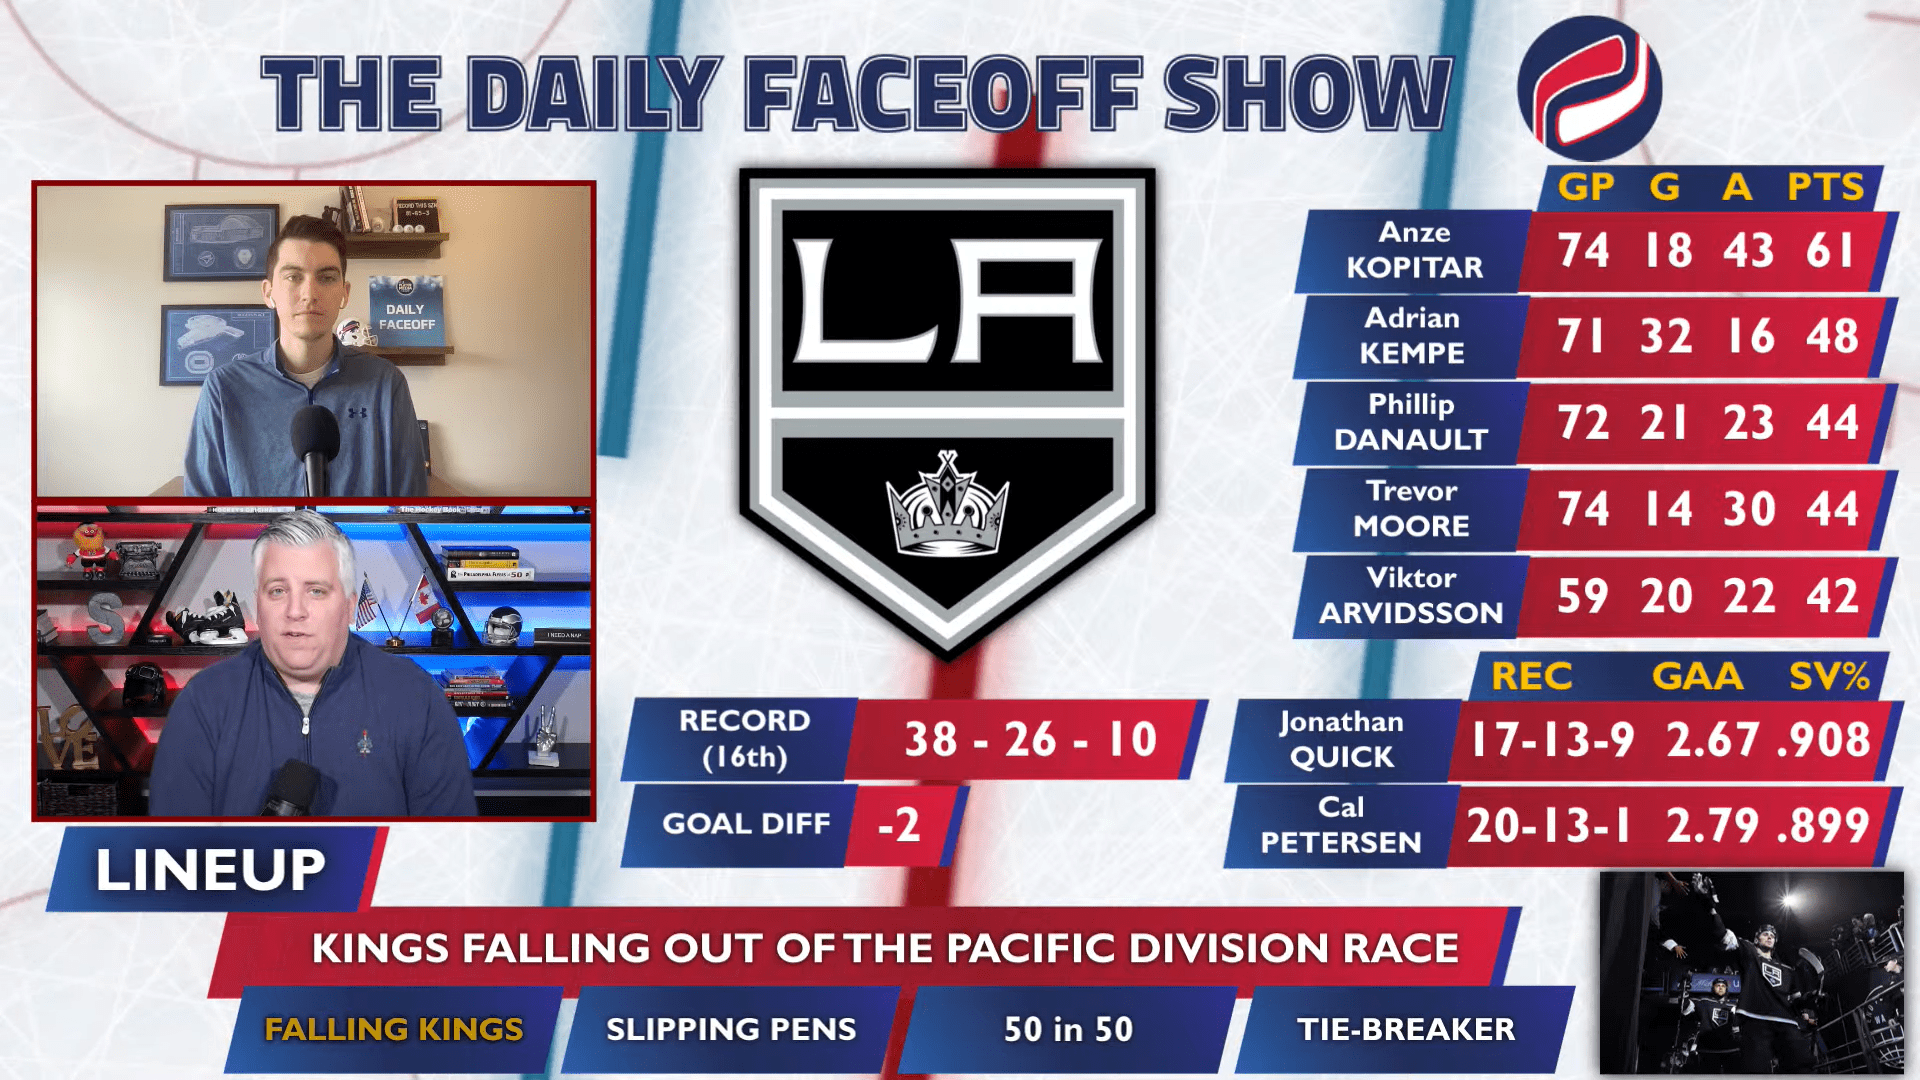 The Daily Faceoff Show: The Los Angeles Kings’ struggles have made things interesting in the Pacific